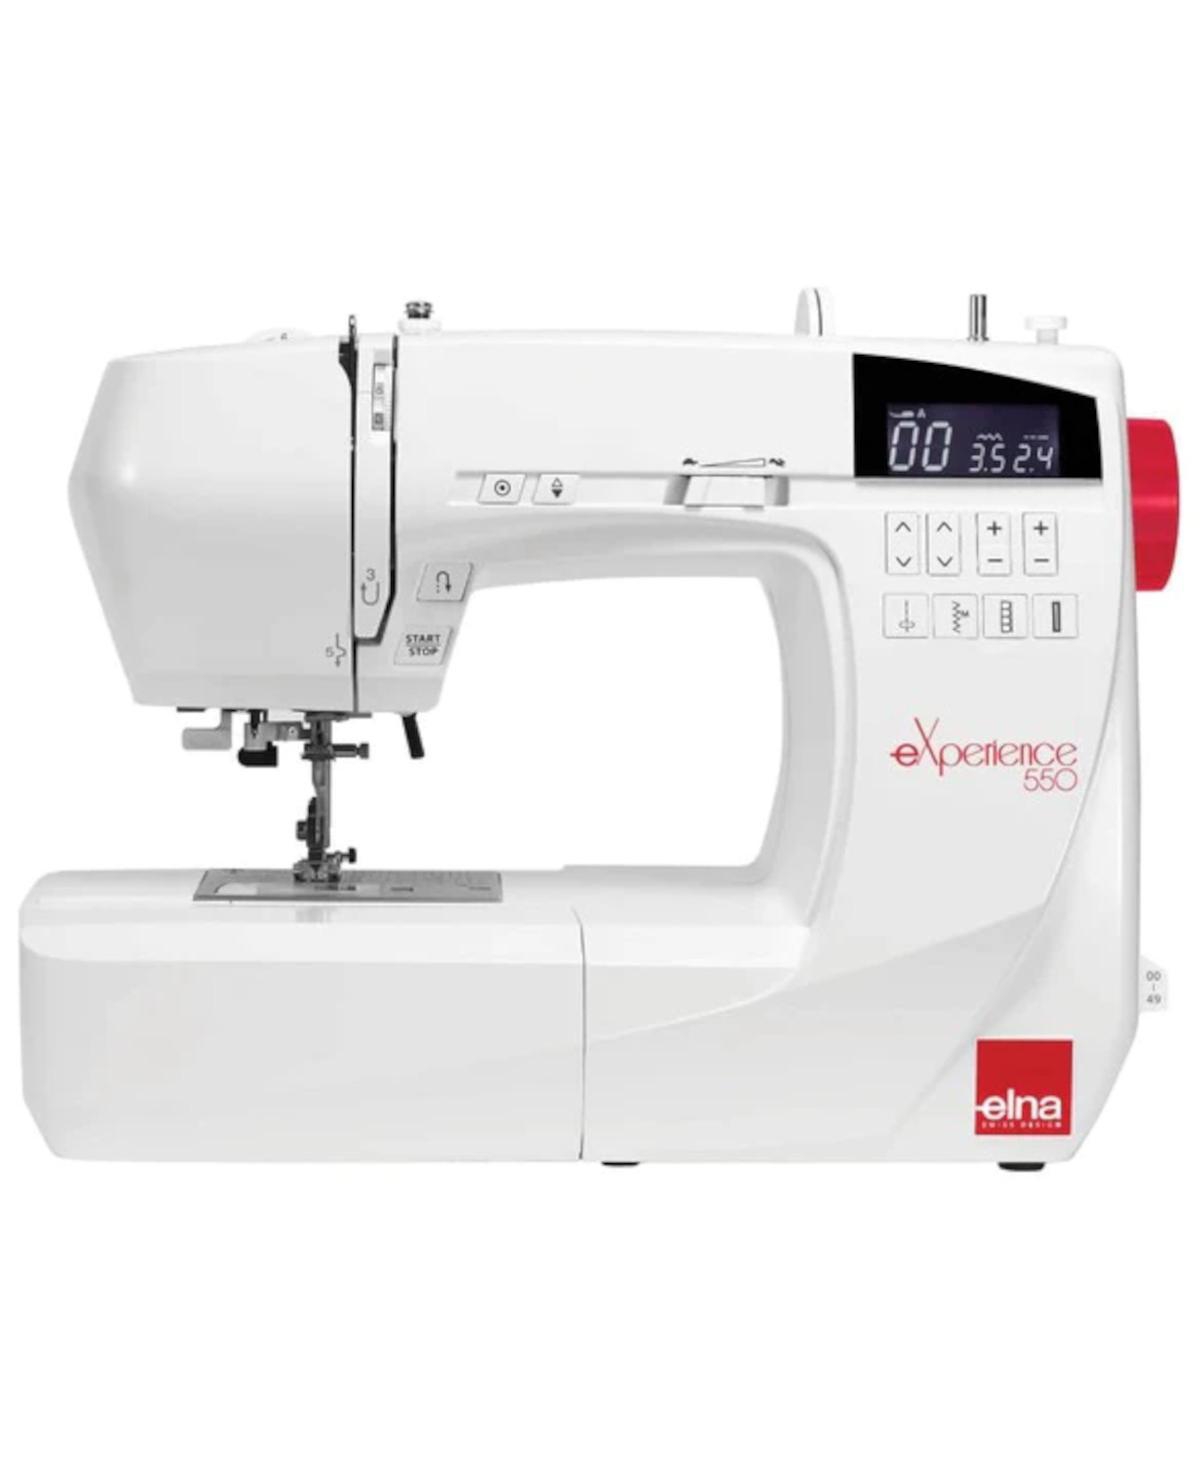 eXperience 550 Sewing Machine - White